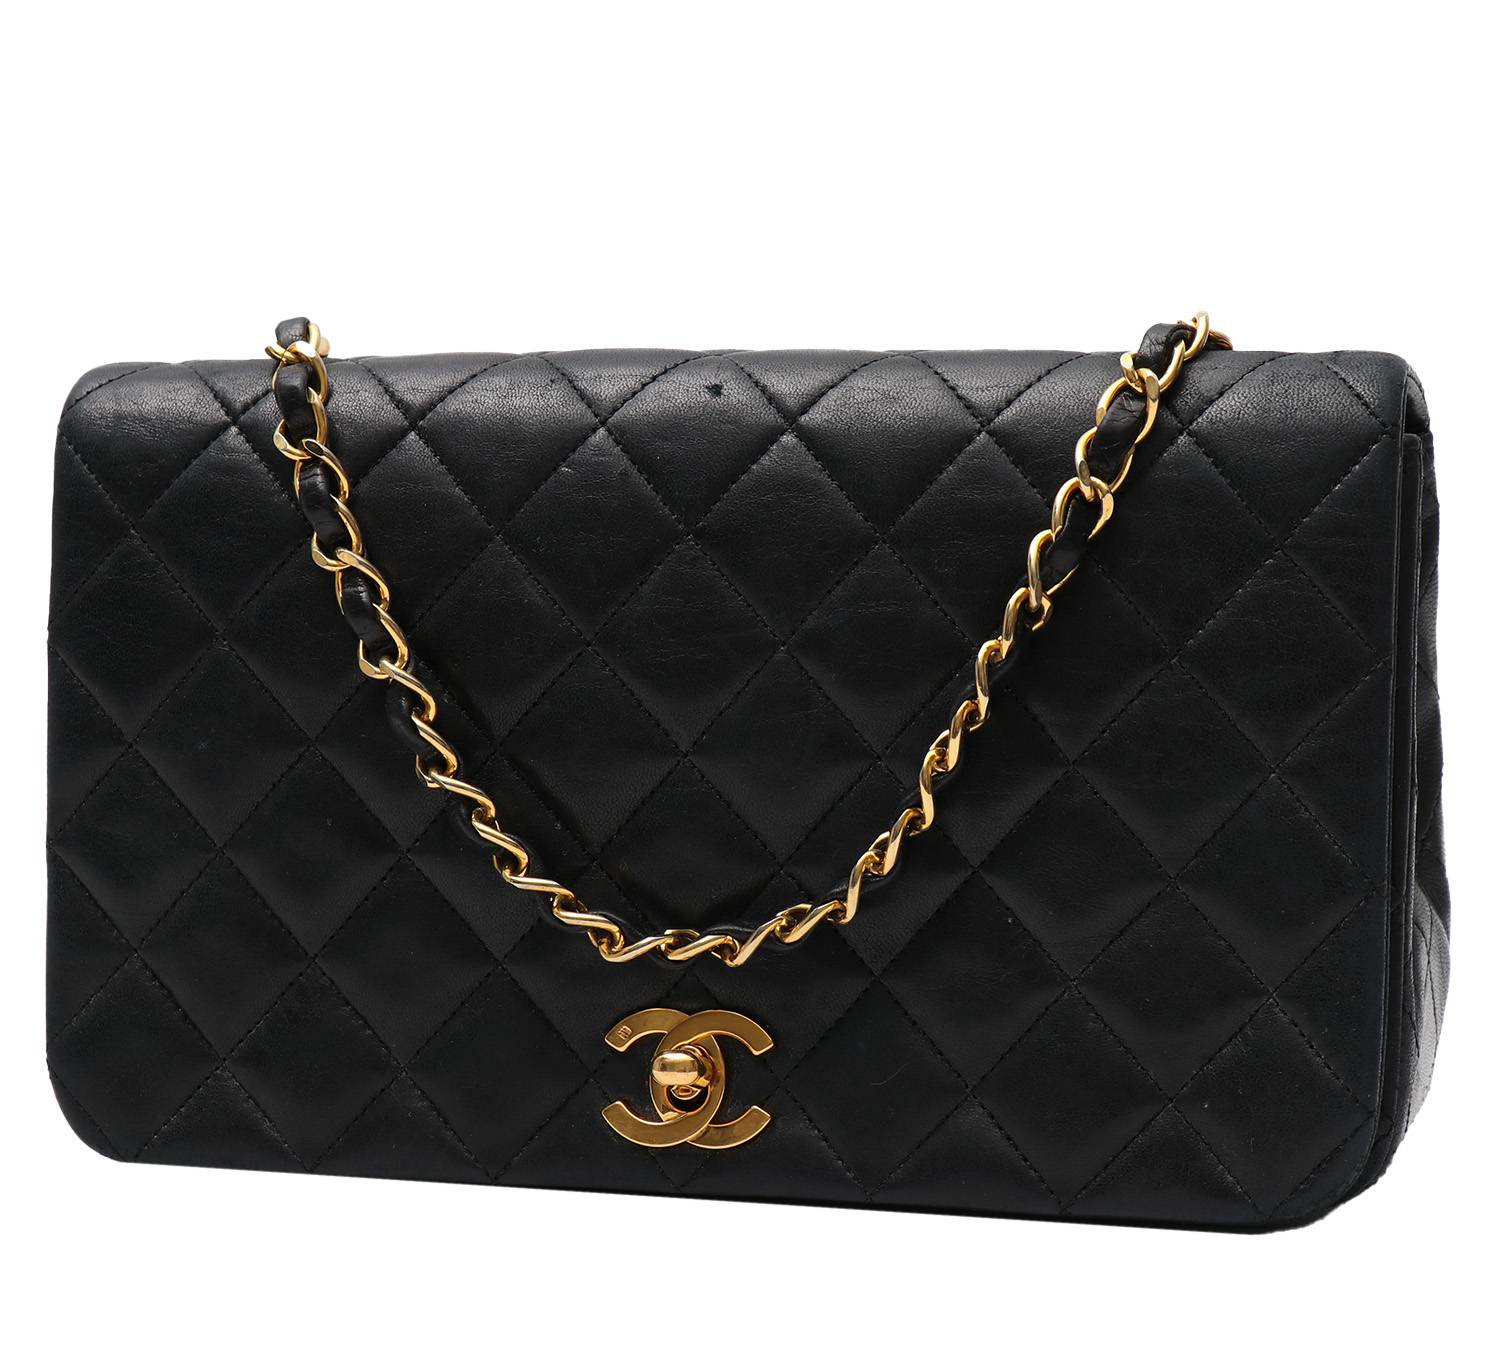 CHANEL Pre-Owned 1995 Mademoiselle Classic Flap Shoulder Bag - Farfetch